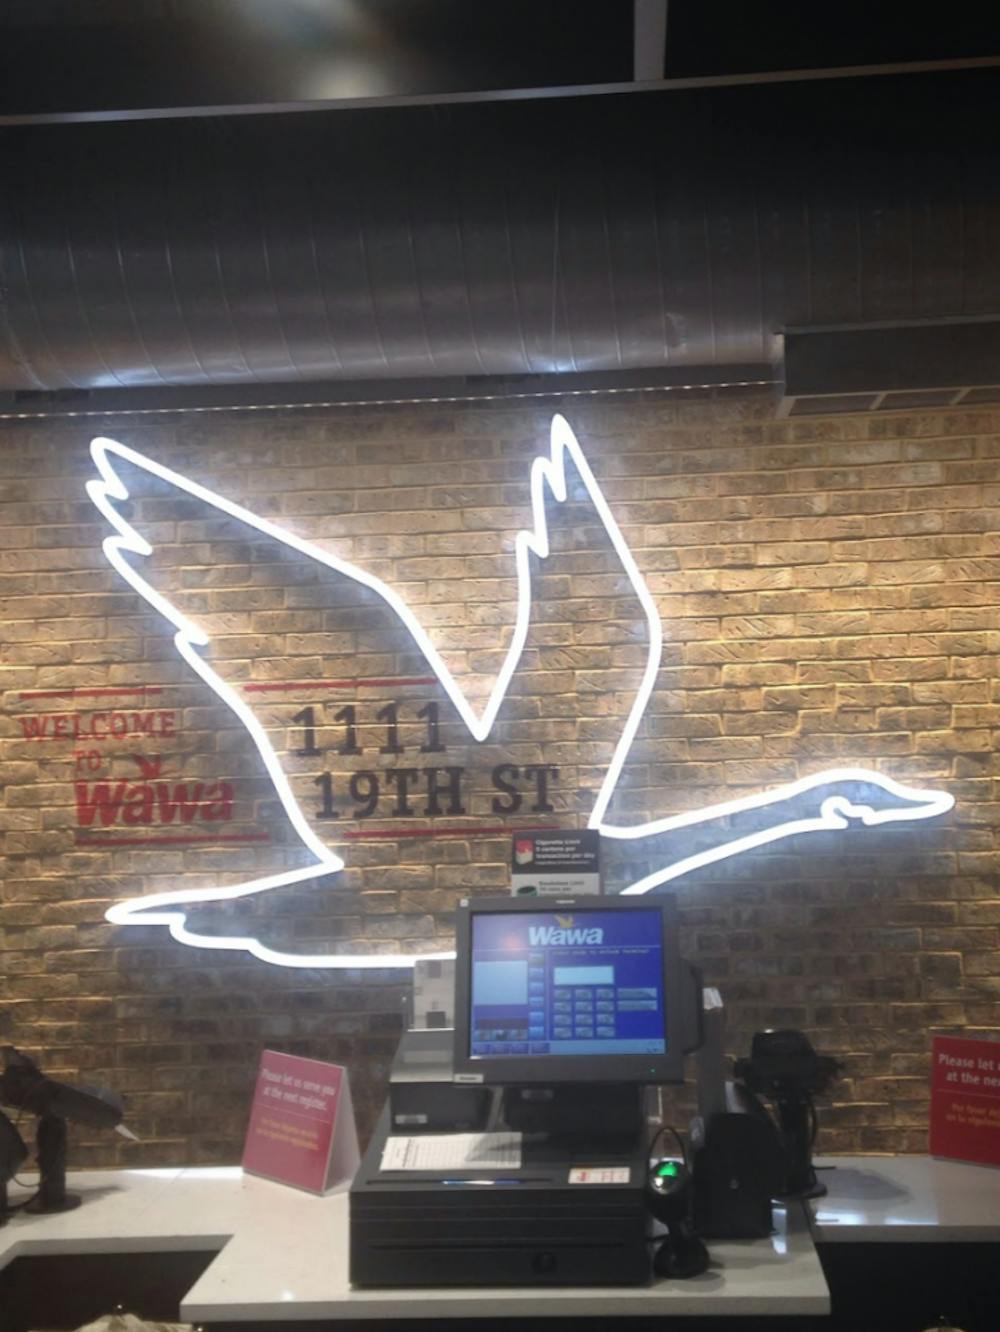 COURTESY OF CATHERINE PALMER
The goose wings of the Wawa logo welcome customers.